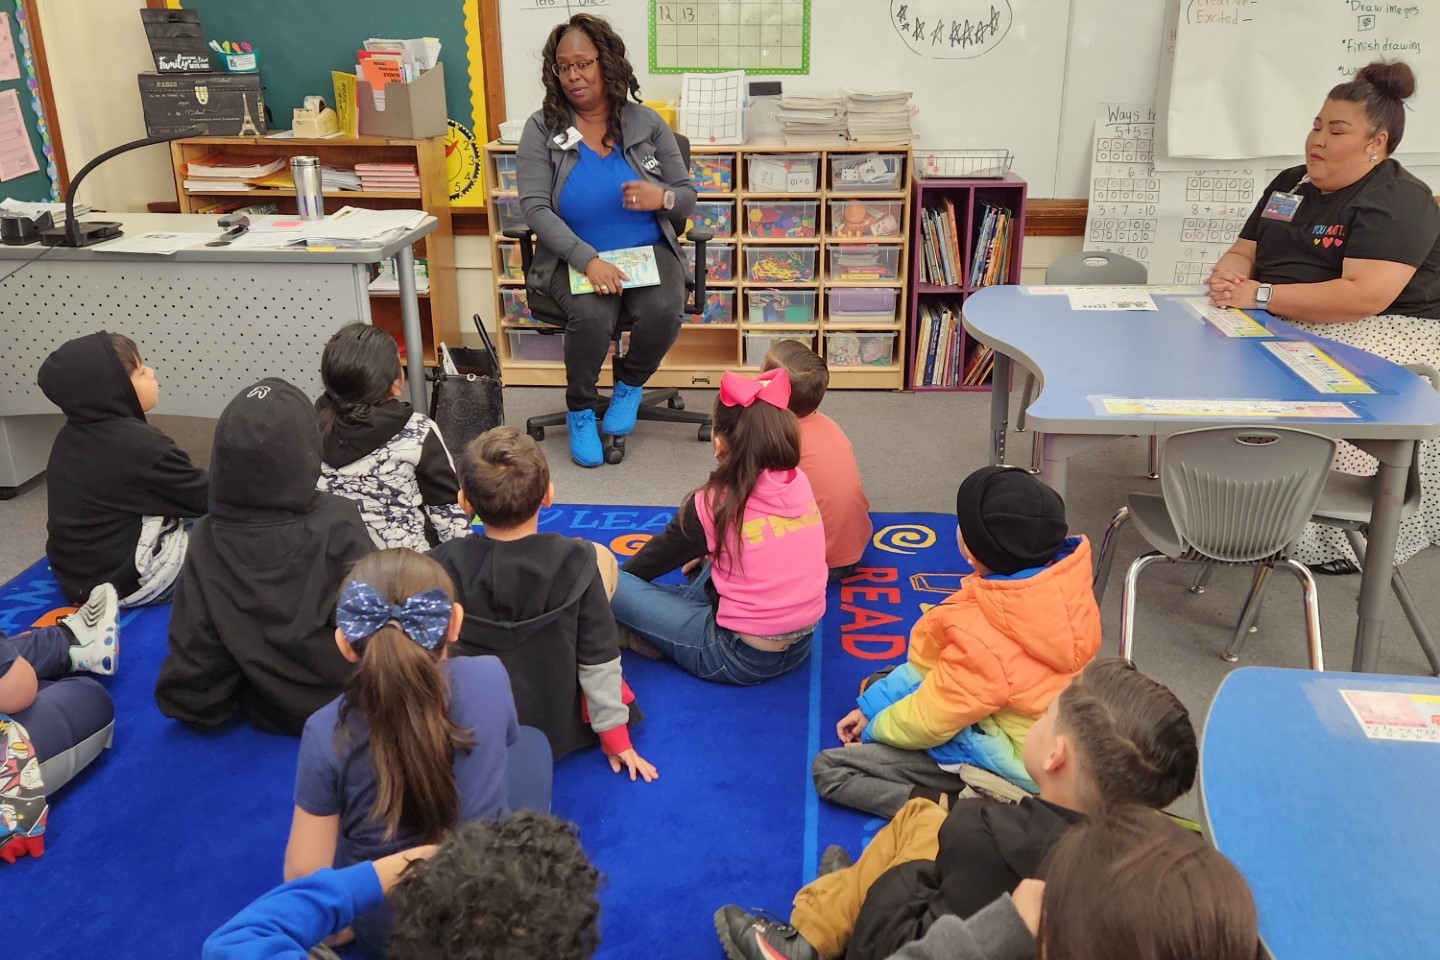 A guest reader shares a story with students sitting on the floor of the classroom